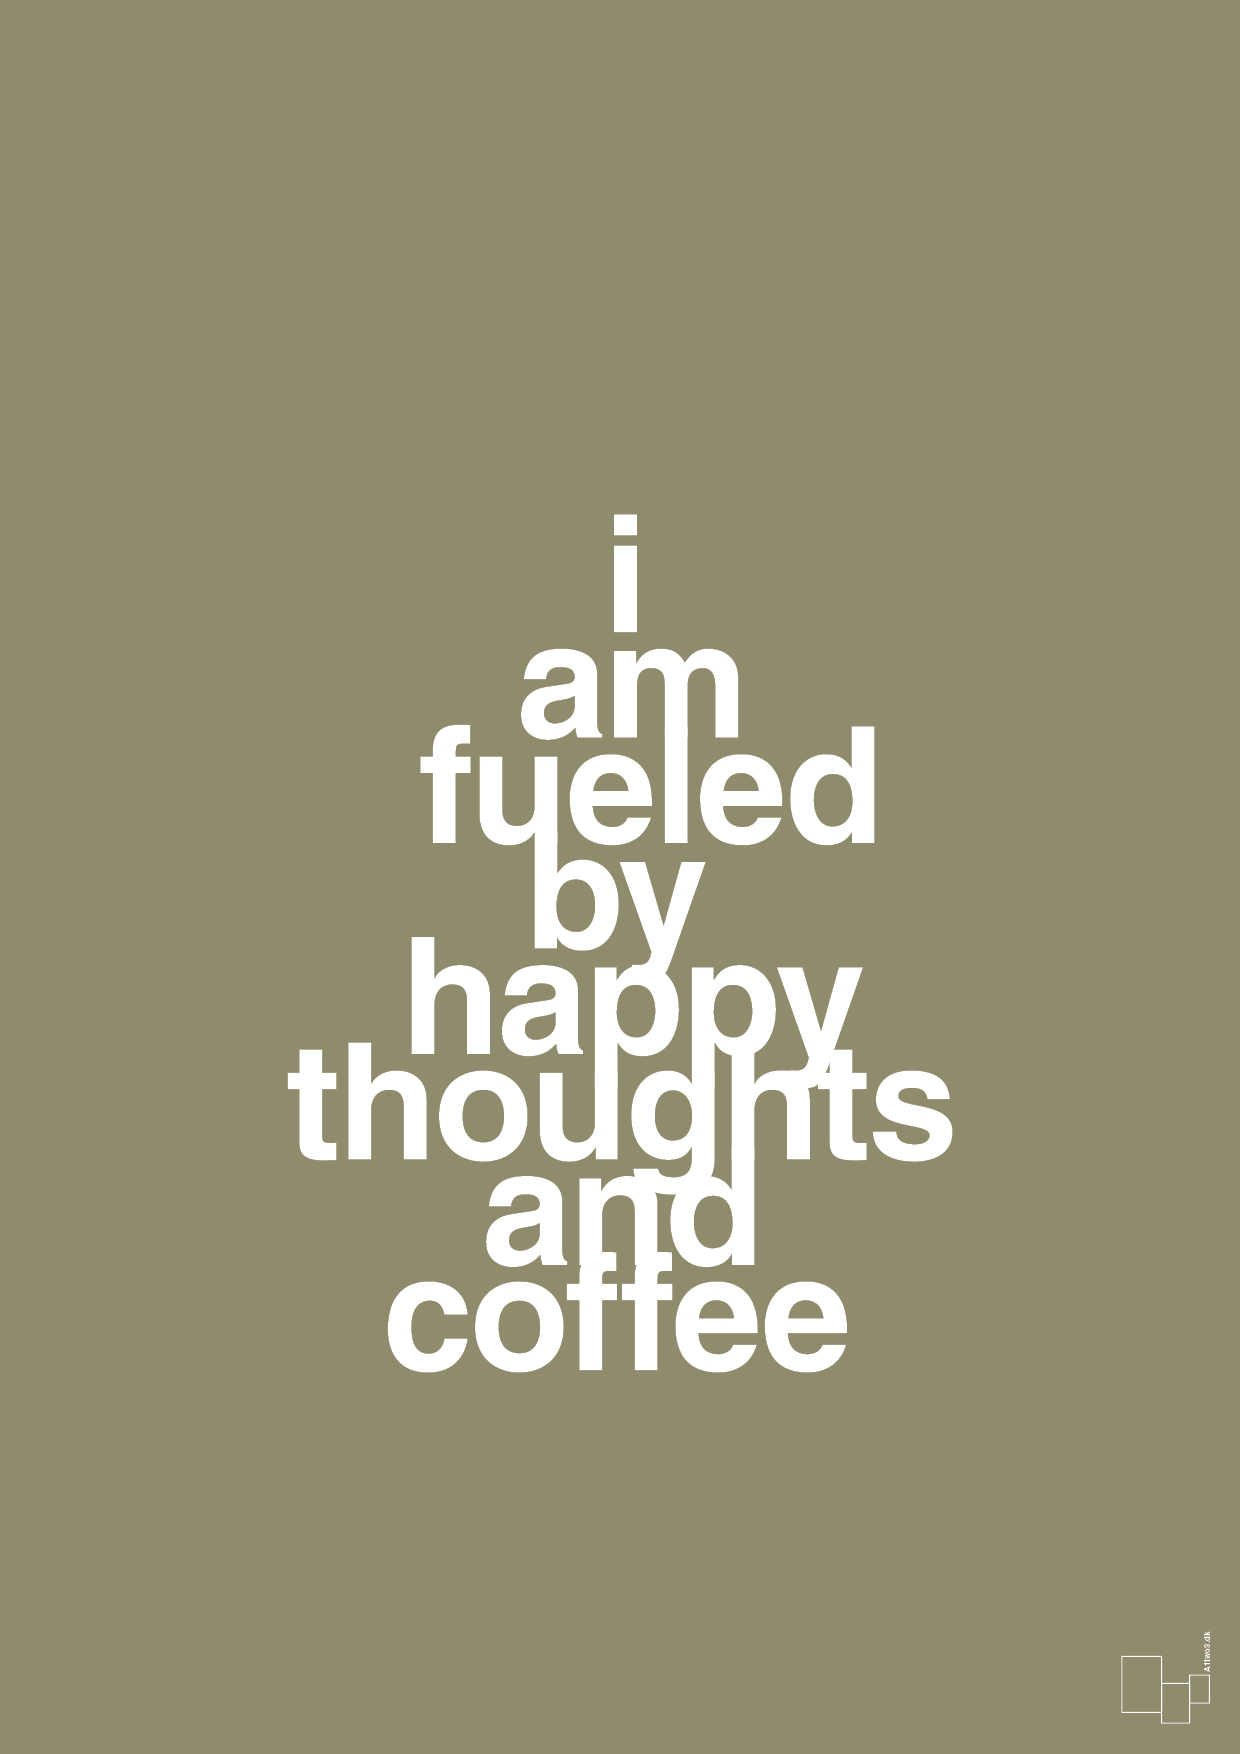 i am fueled by happy thoughts and coffee - Plakat med Mad & Drikke i Misty Forrest